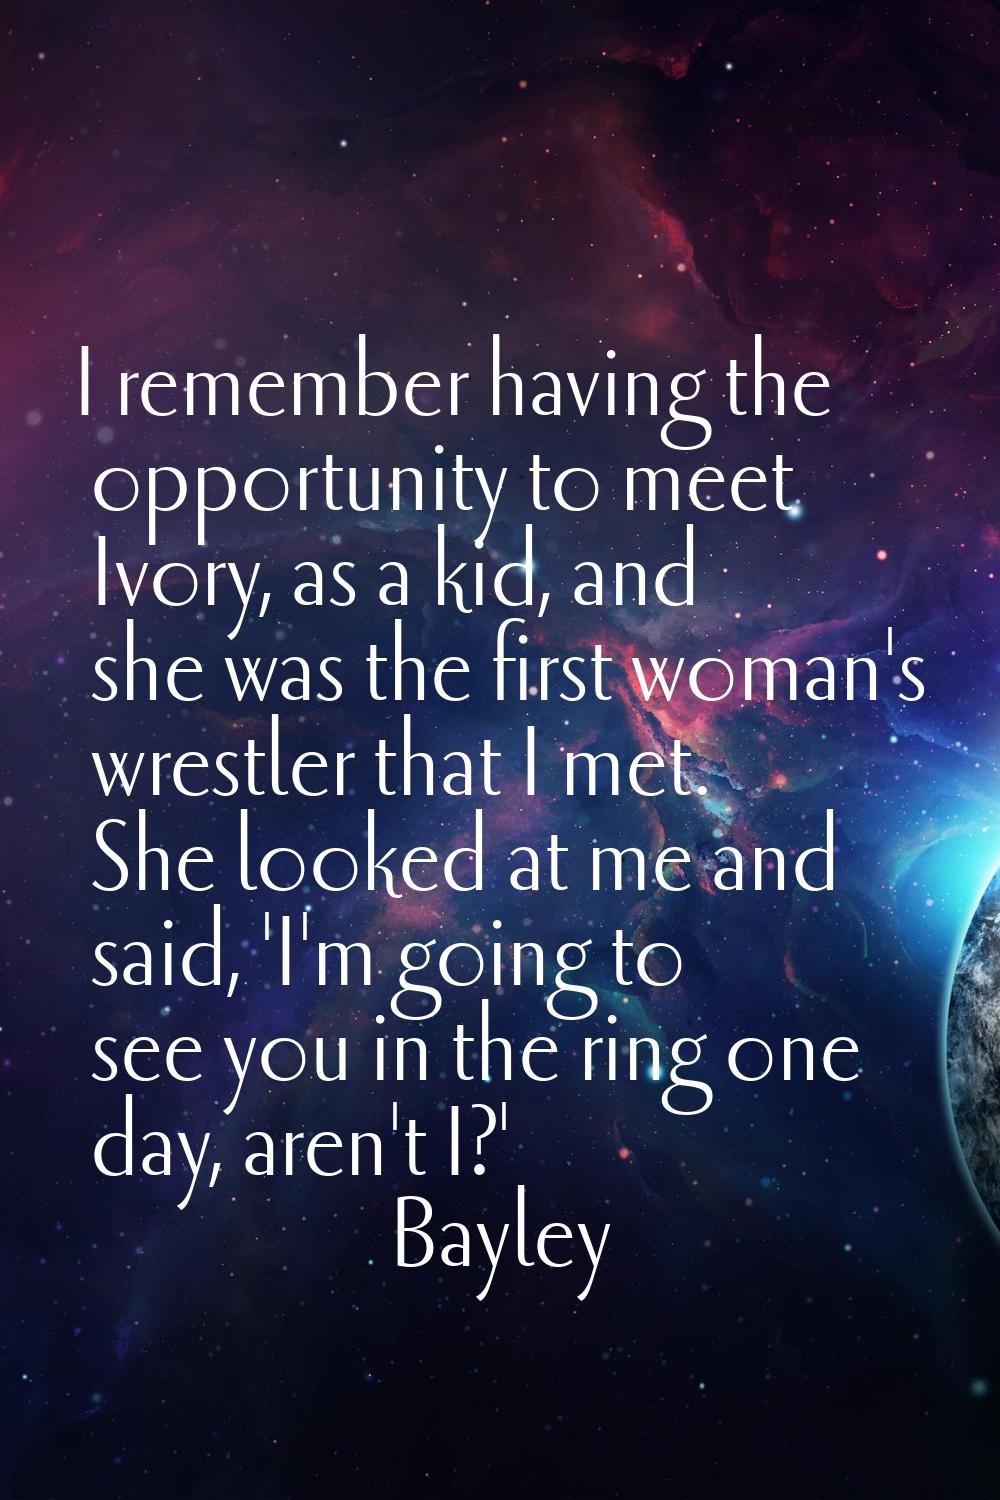 I remember having the opportunity to meet Ivory, as a kid, and she was the first woman's wrestler t